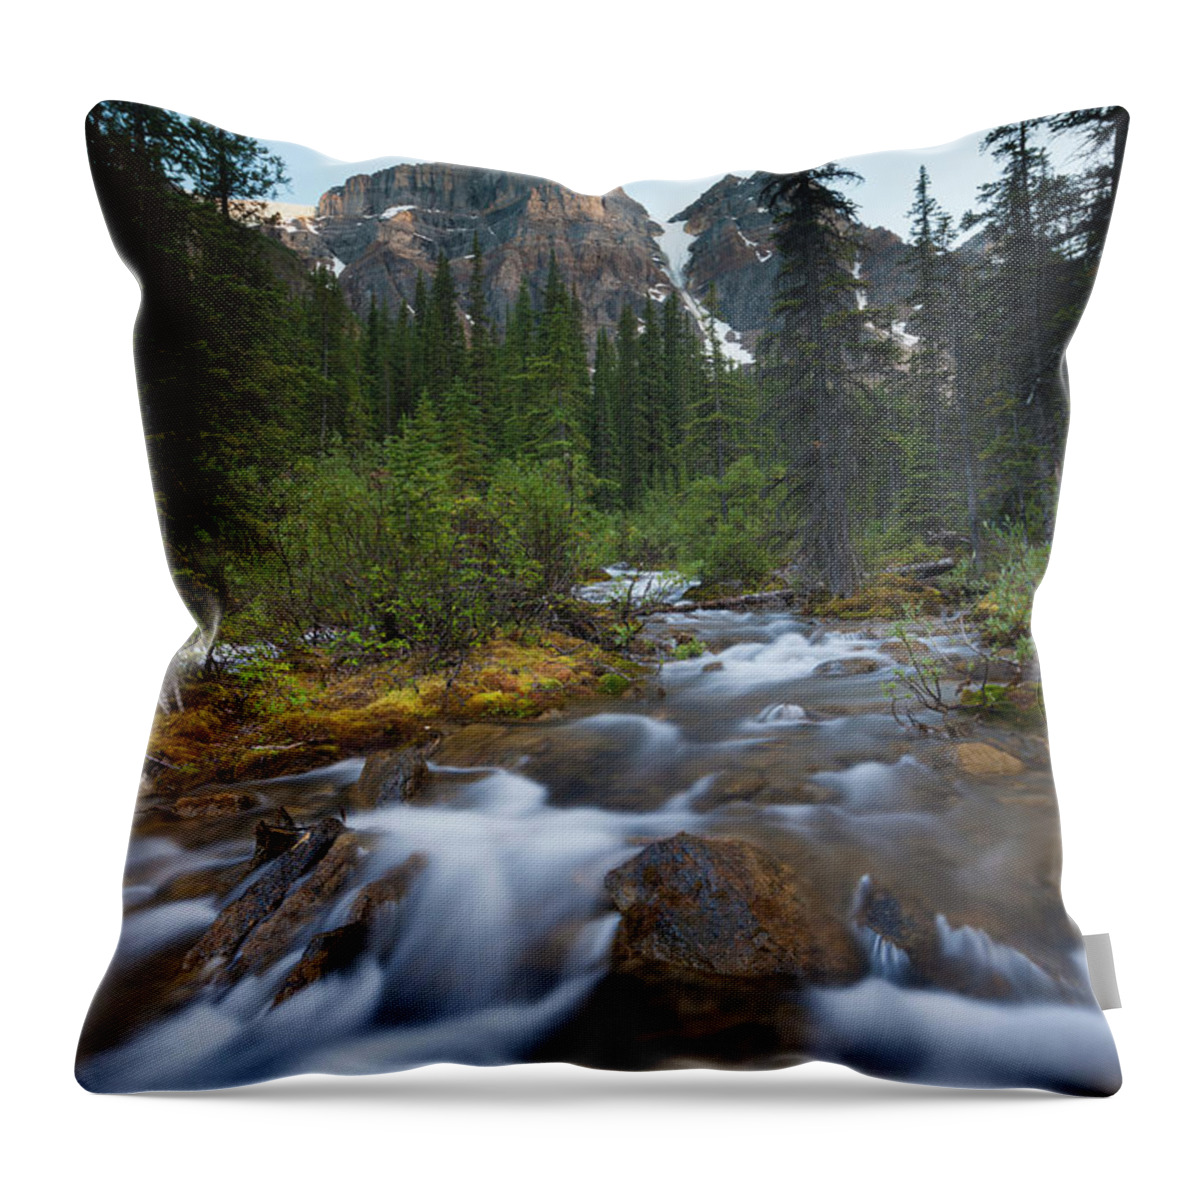 Non-urban Scene Throw Pillow featuring the photograph Stream In The Valley Of The Ten Peaks by Mint Images - Art Wolfe